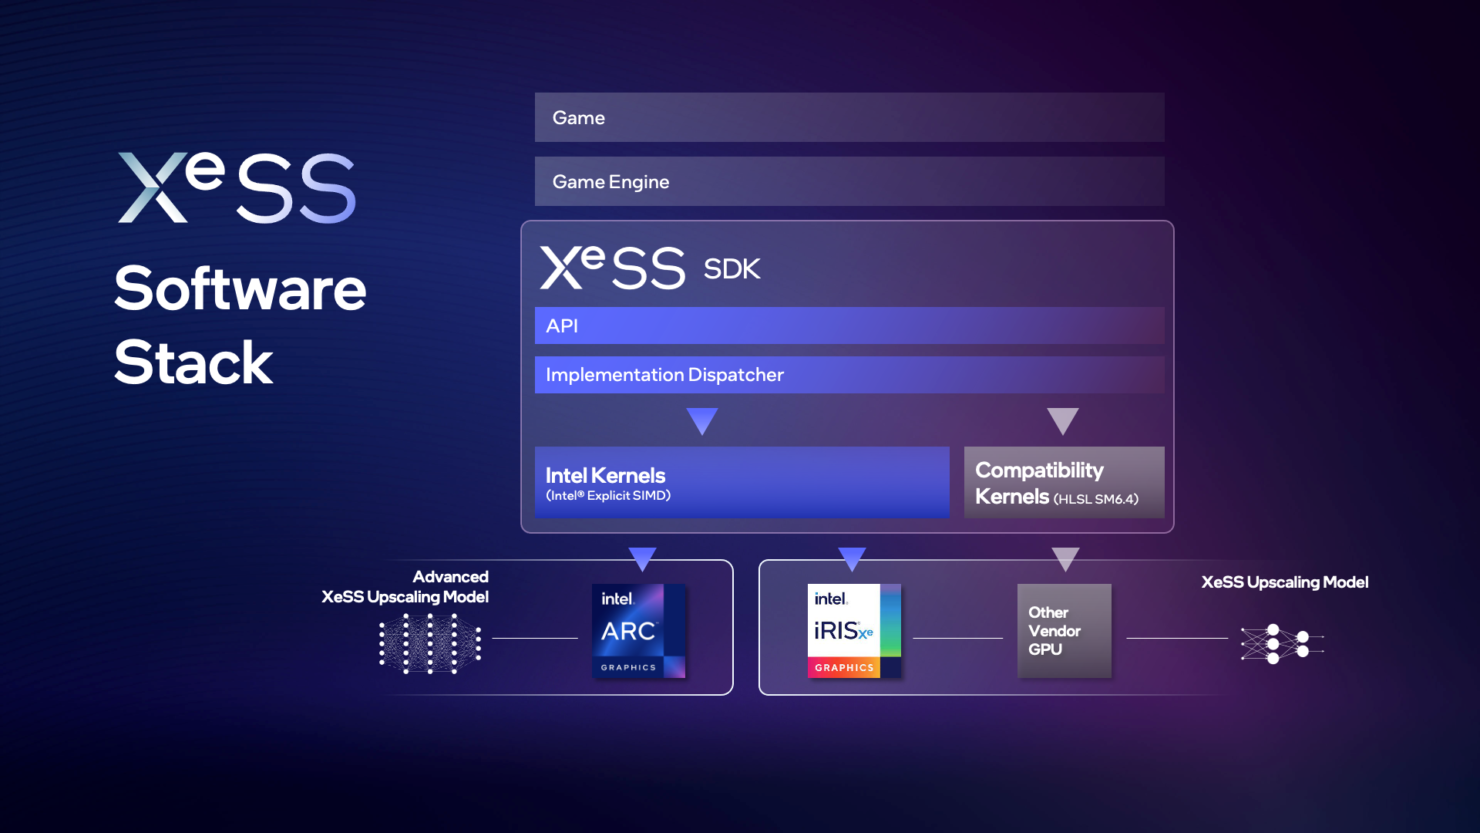 xess-software-stack-1480x833.png